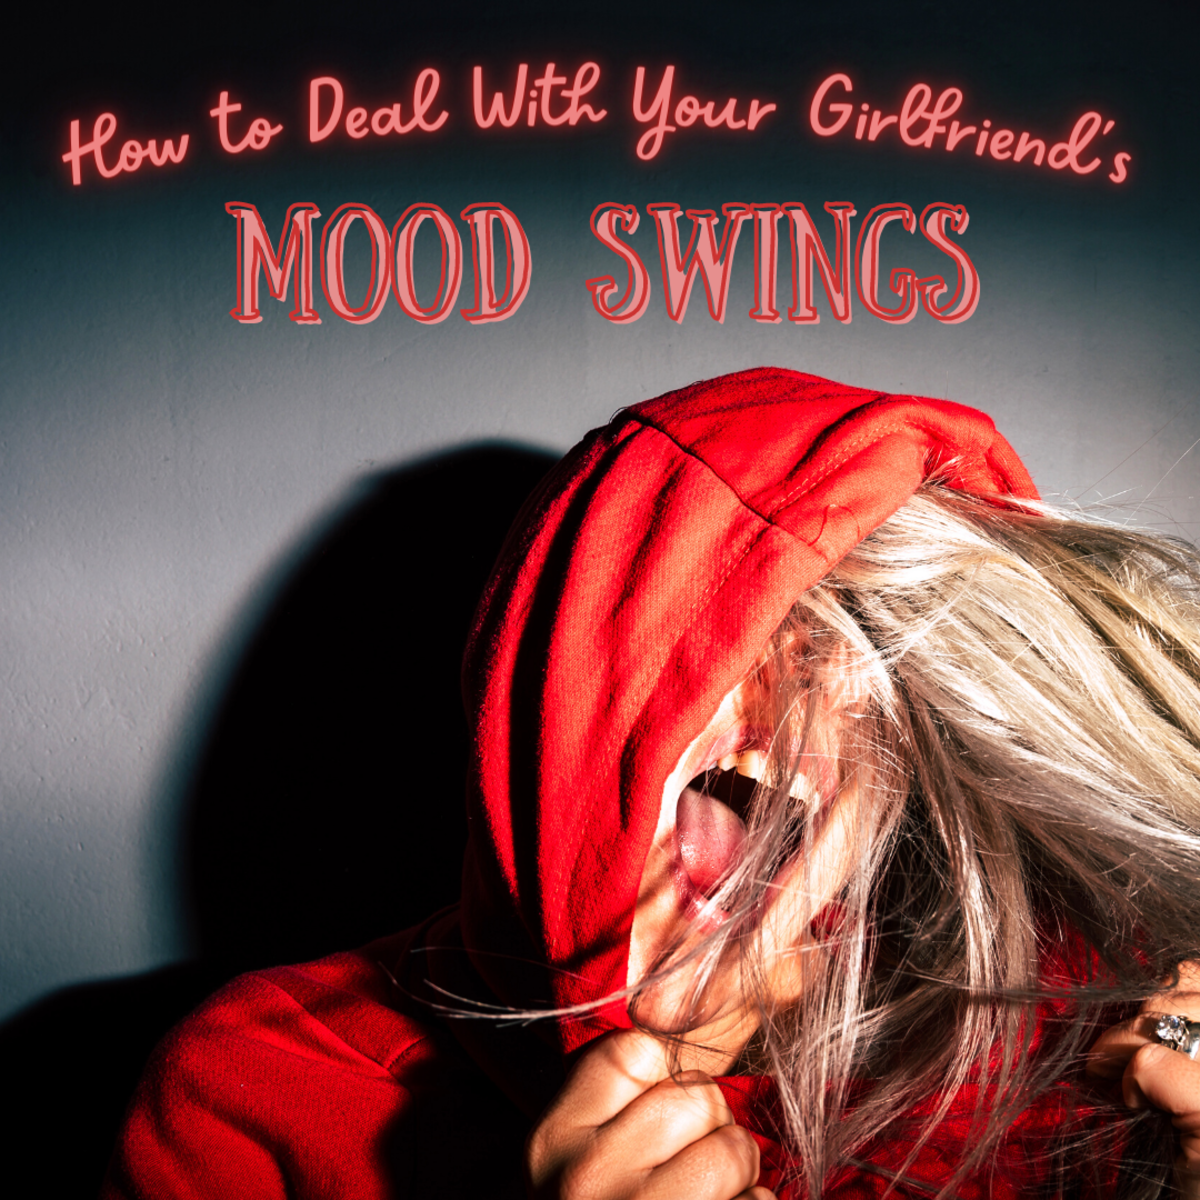 How to Deal With Your Girlfriend's or Wife's Mood Swings